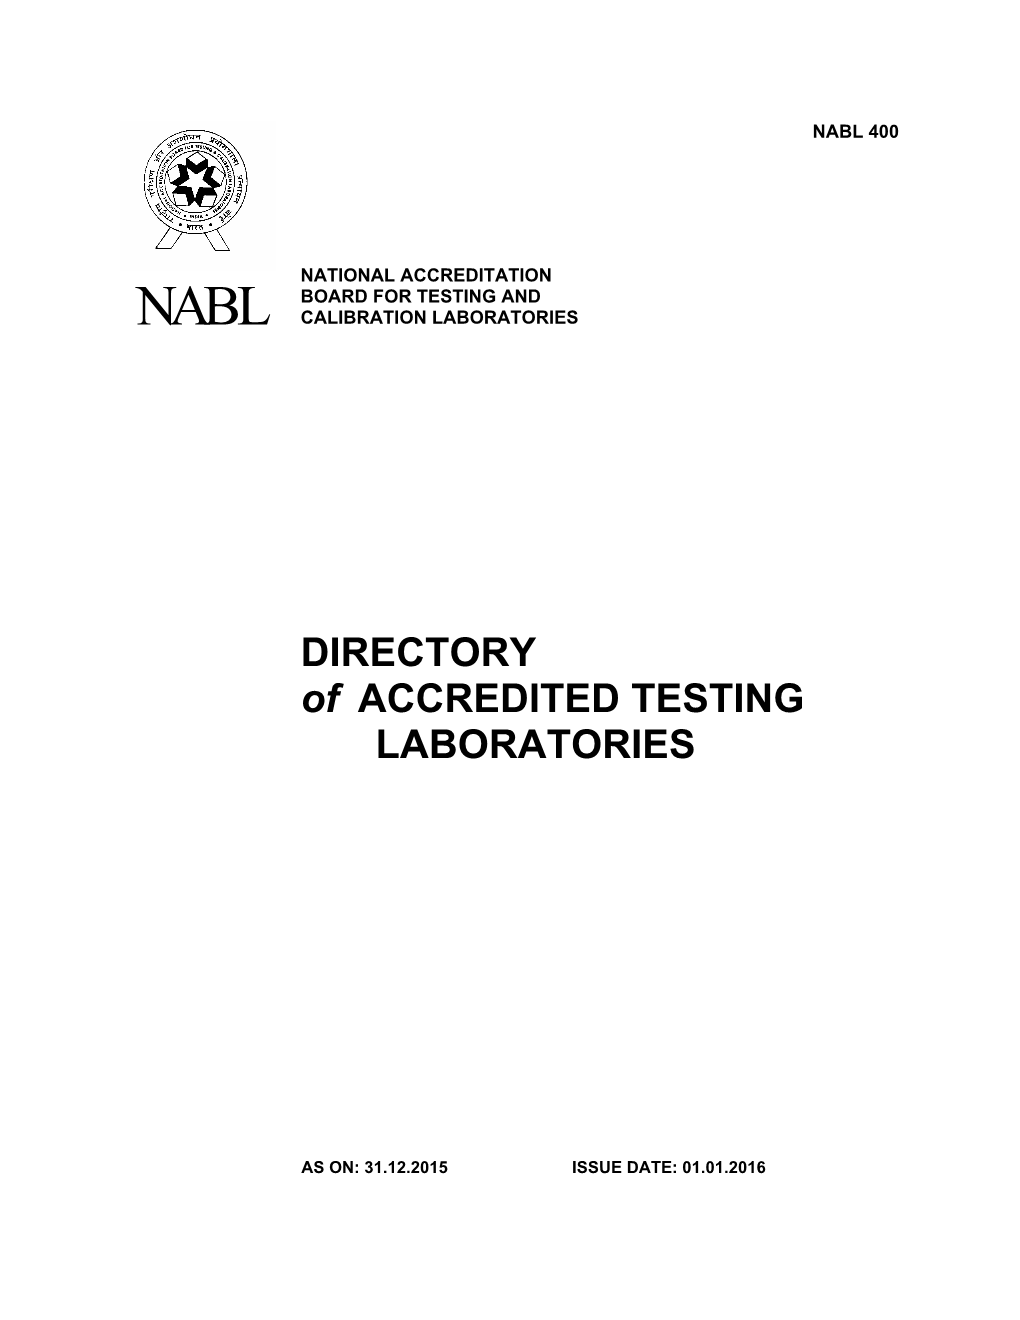 DIRECTORY of ACCREDITED TESTING LABORATORIES